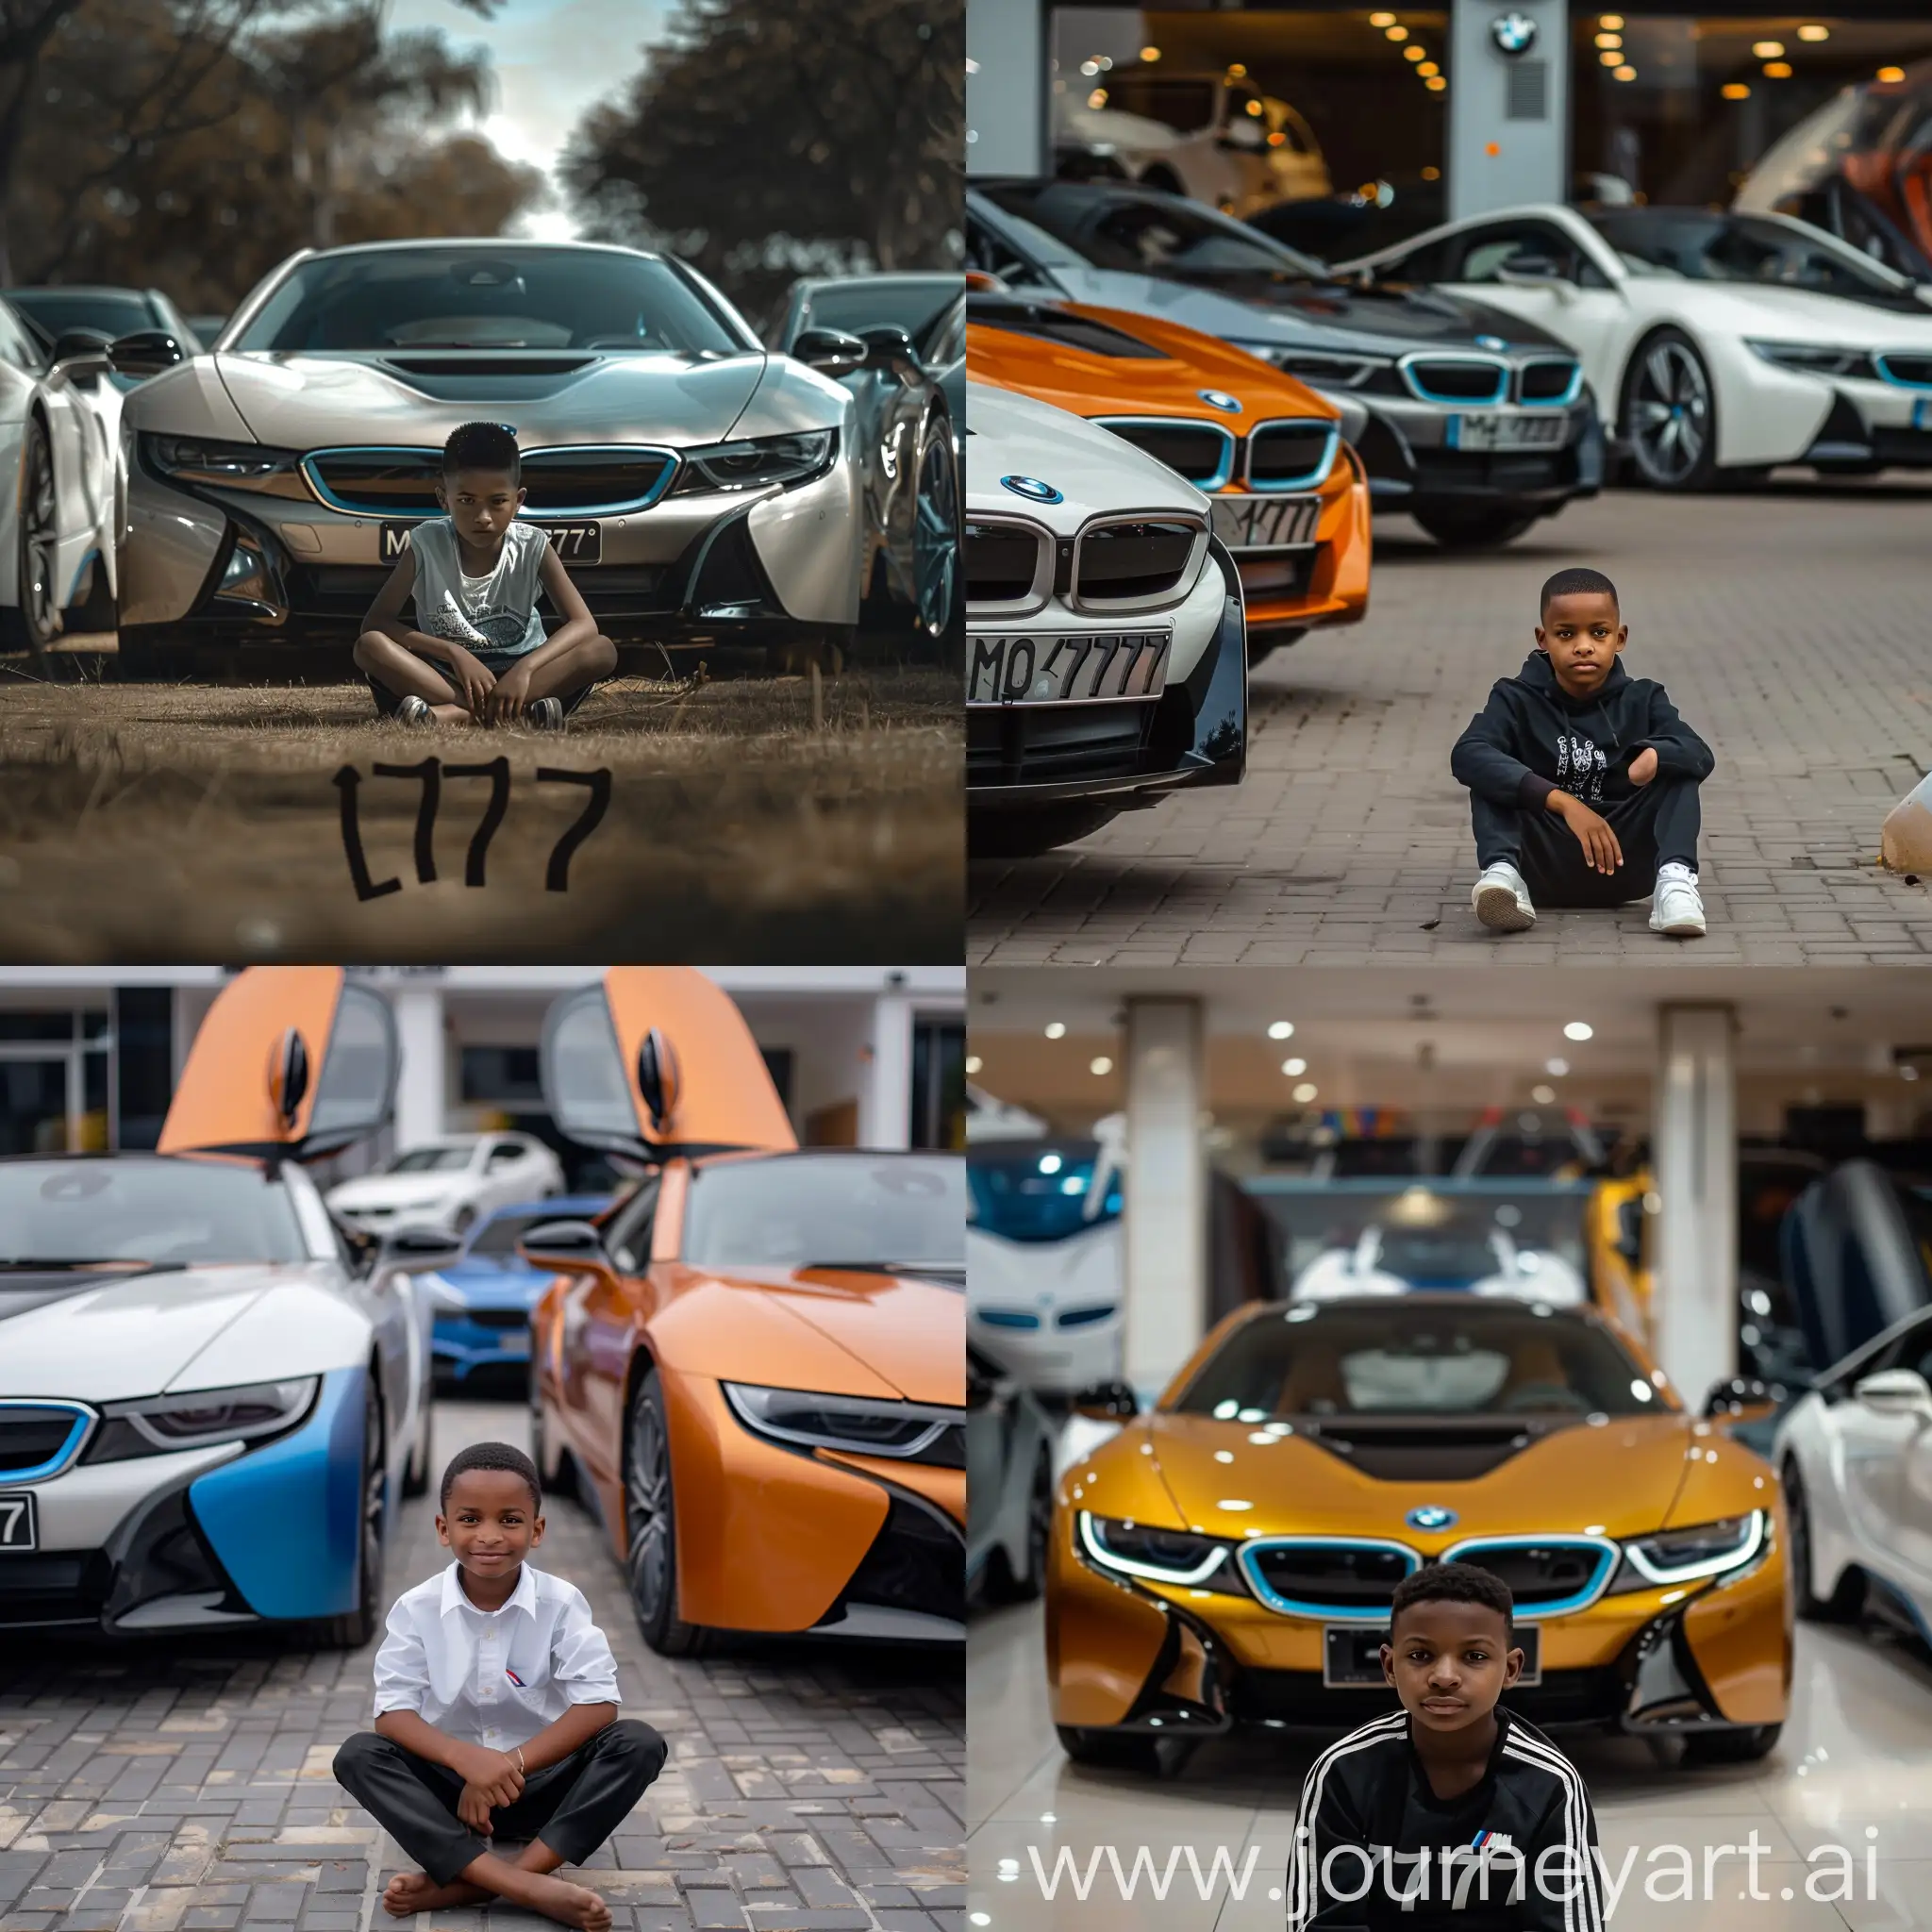 Boy-Sitting-in-Front-of-BMW-Cars-with-License-Plate-Number-0777